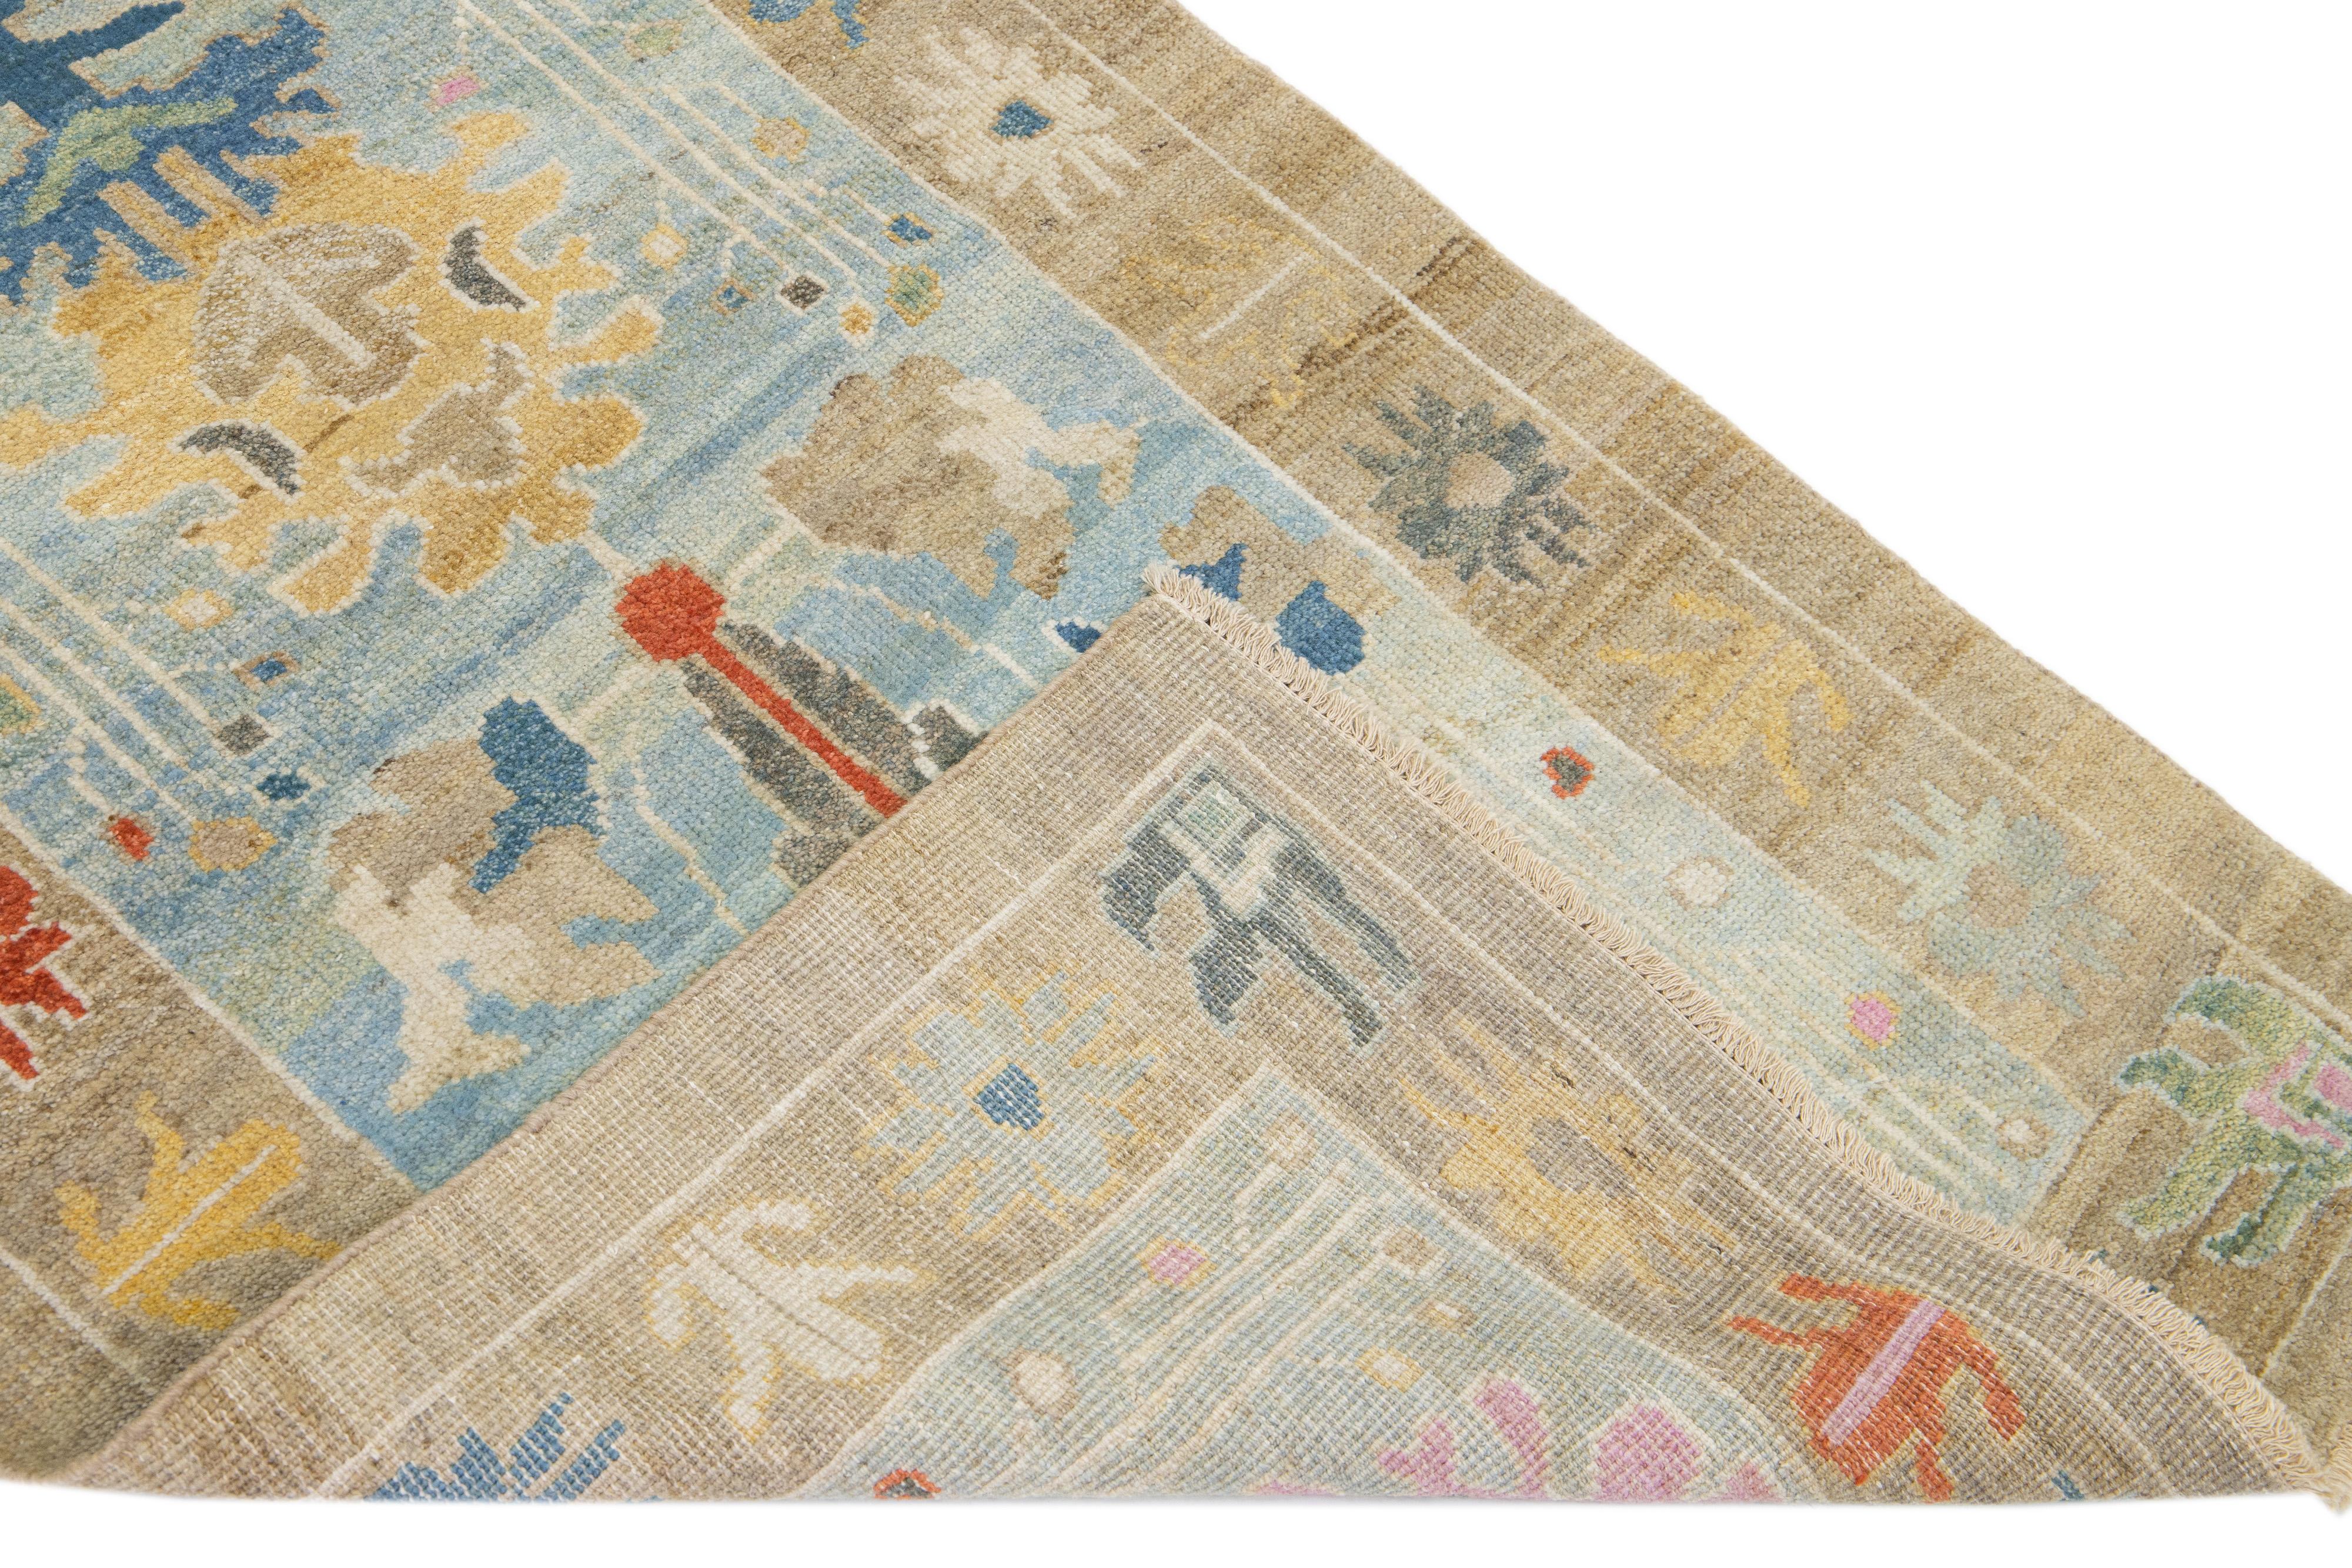 Modern Mahal hand-knotted wool runner with a blue field. This piece has a tan frame and multicolor accent colors that features a gorgeous all-over floral design.

This rug measures: 3' x 18'8